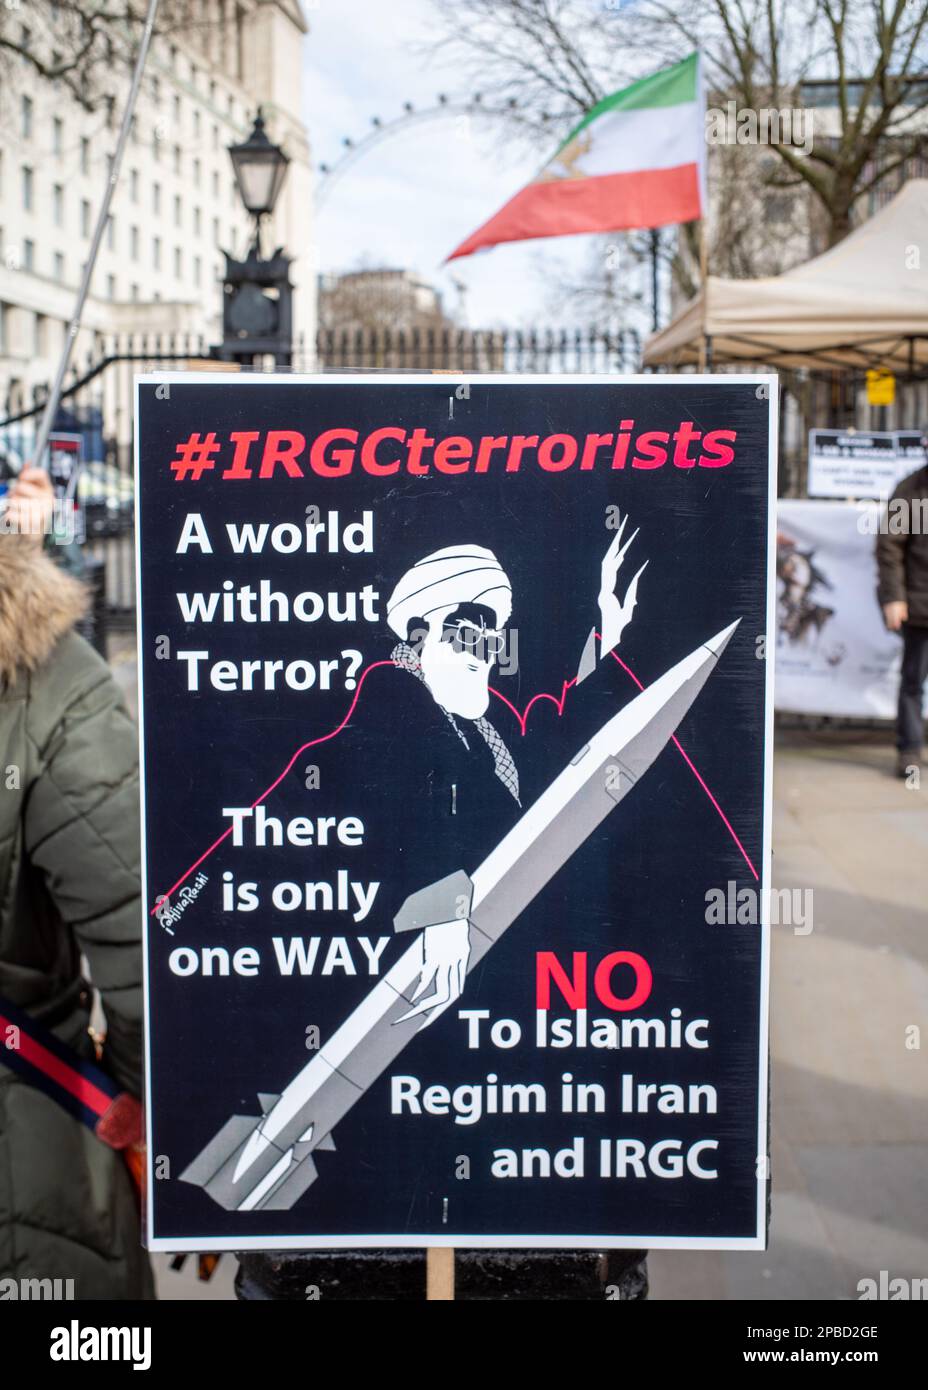 Protest poster in London against 'Islamic Revolutionary Guard Corps' (IRGC) - terrorists, No to Islamic Regime - depicting Ali Khamenei on a missile. Stock Photo